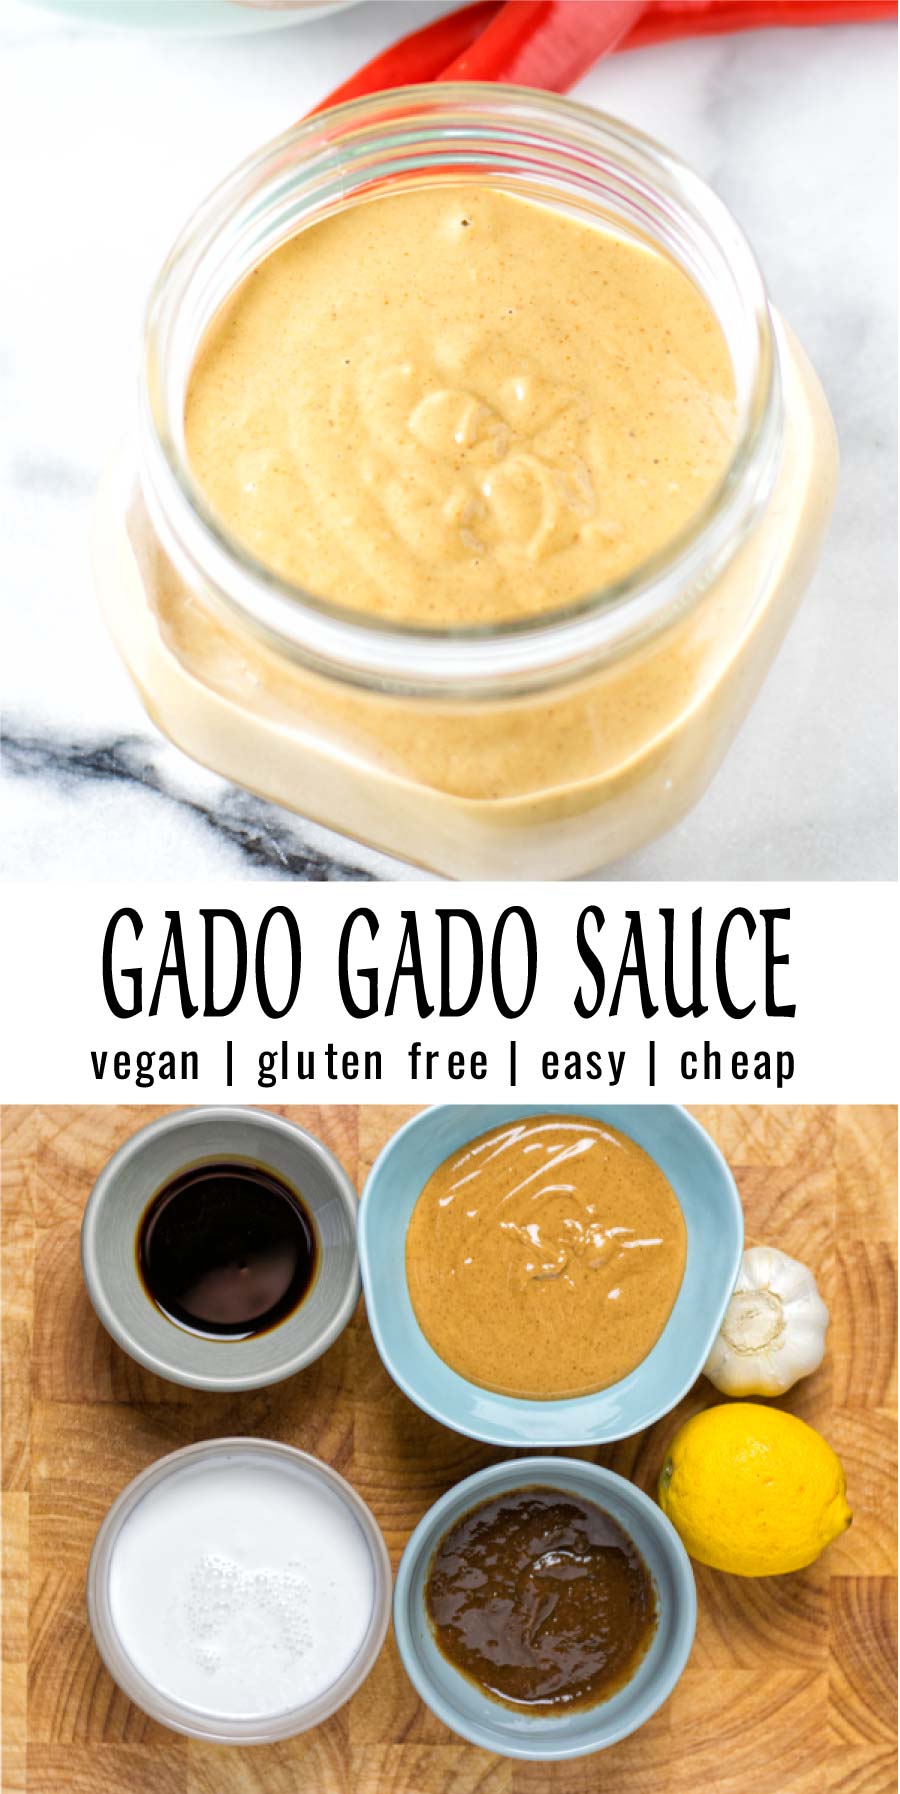 This Gado Gado Sauce is made with simple ingredients and so satisfying. Not only a keeper for any gado gado so versatile and naturally vegan. #vegan #dairyfree #glutenfree #vegetarian #contentednesscooking #dinner #lunch #mealprep #gadogadosauce